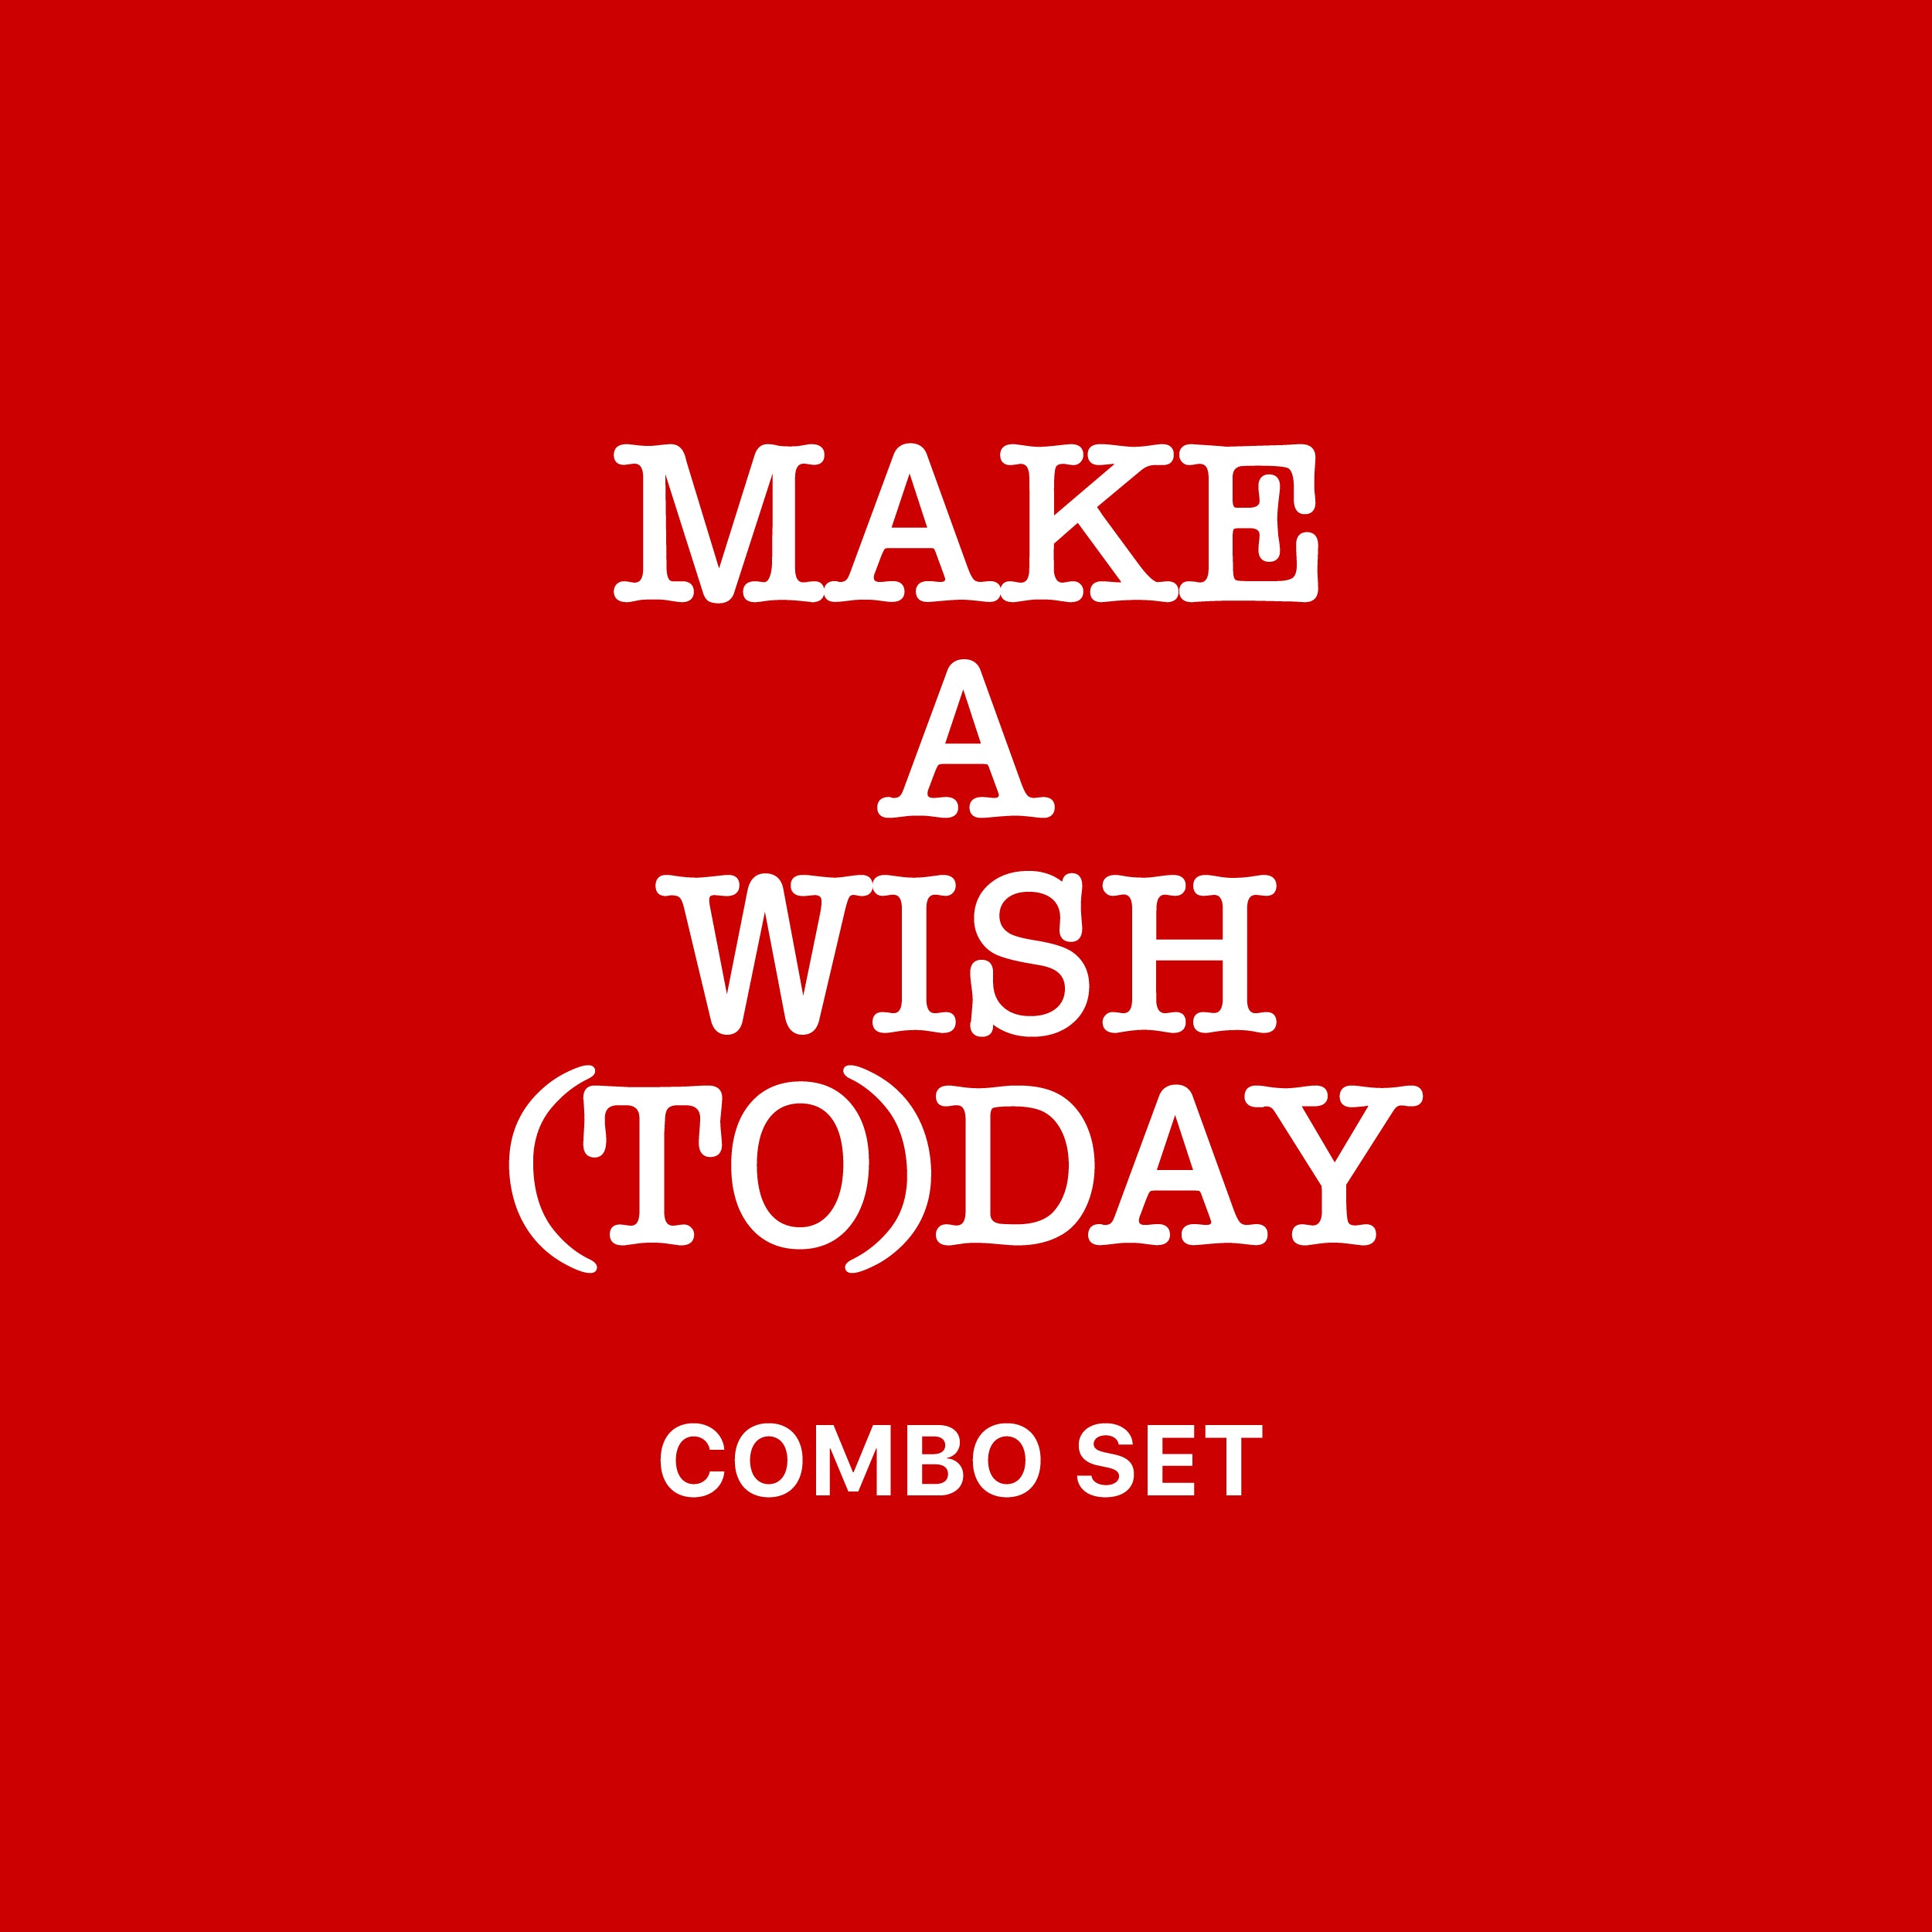 MAKE A WISH (TO)DAY COMBO SET